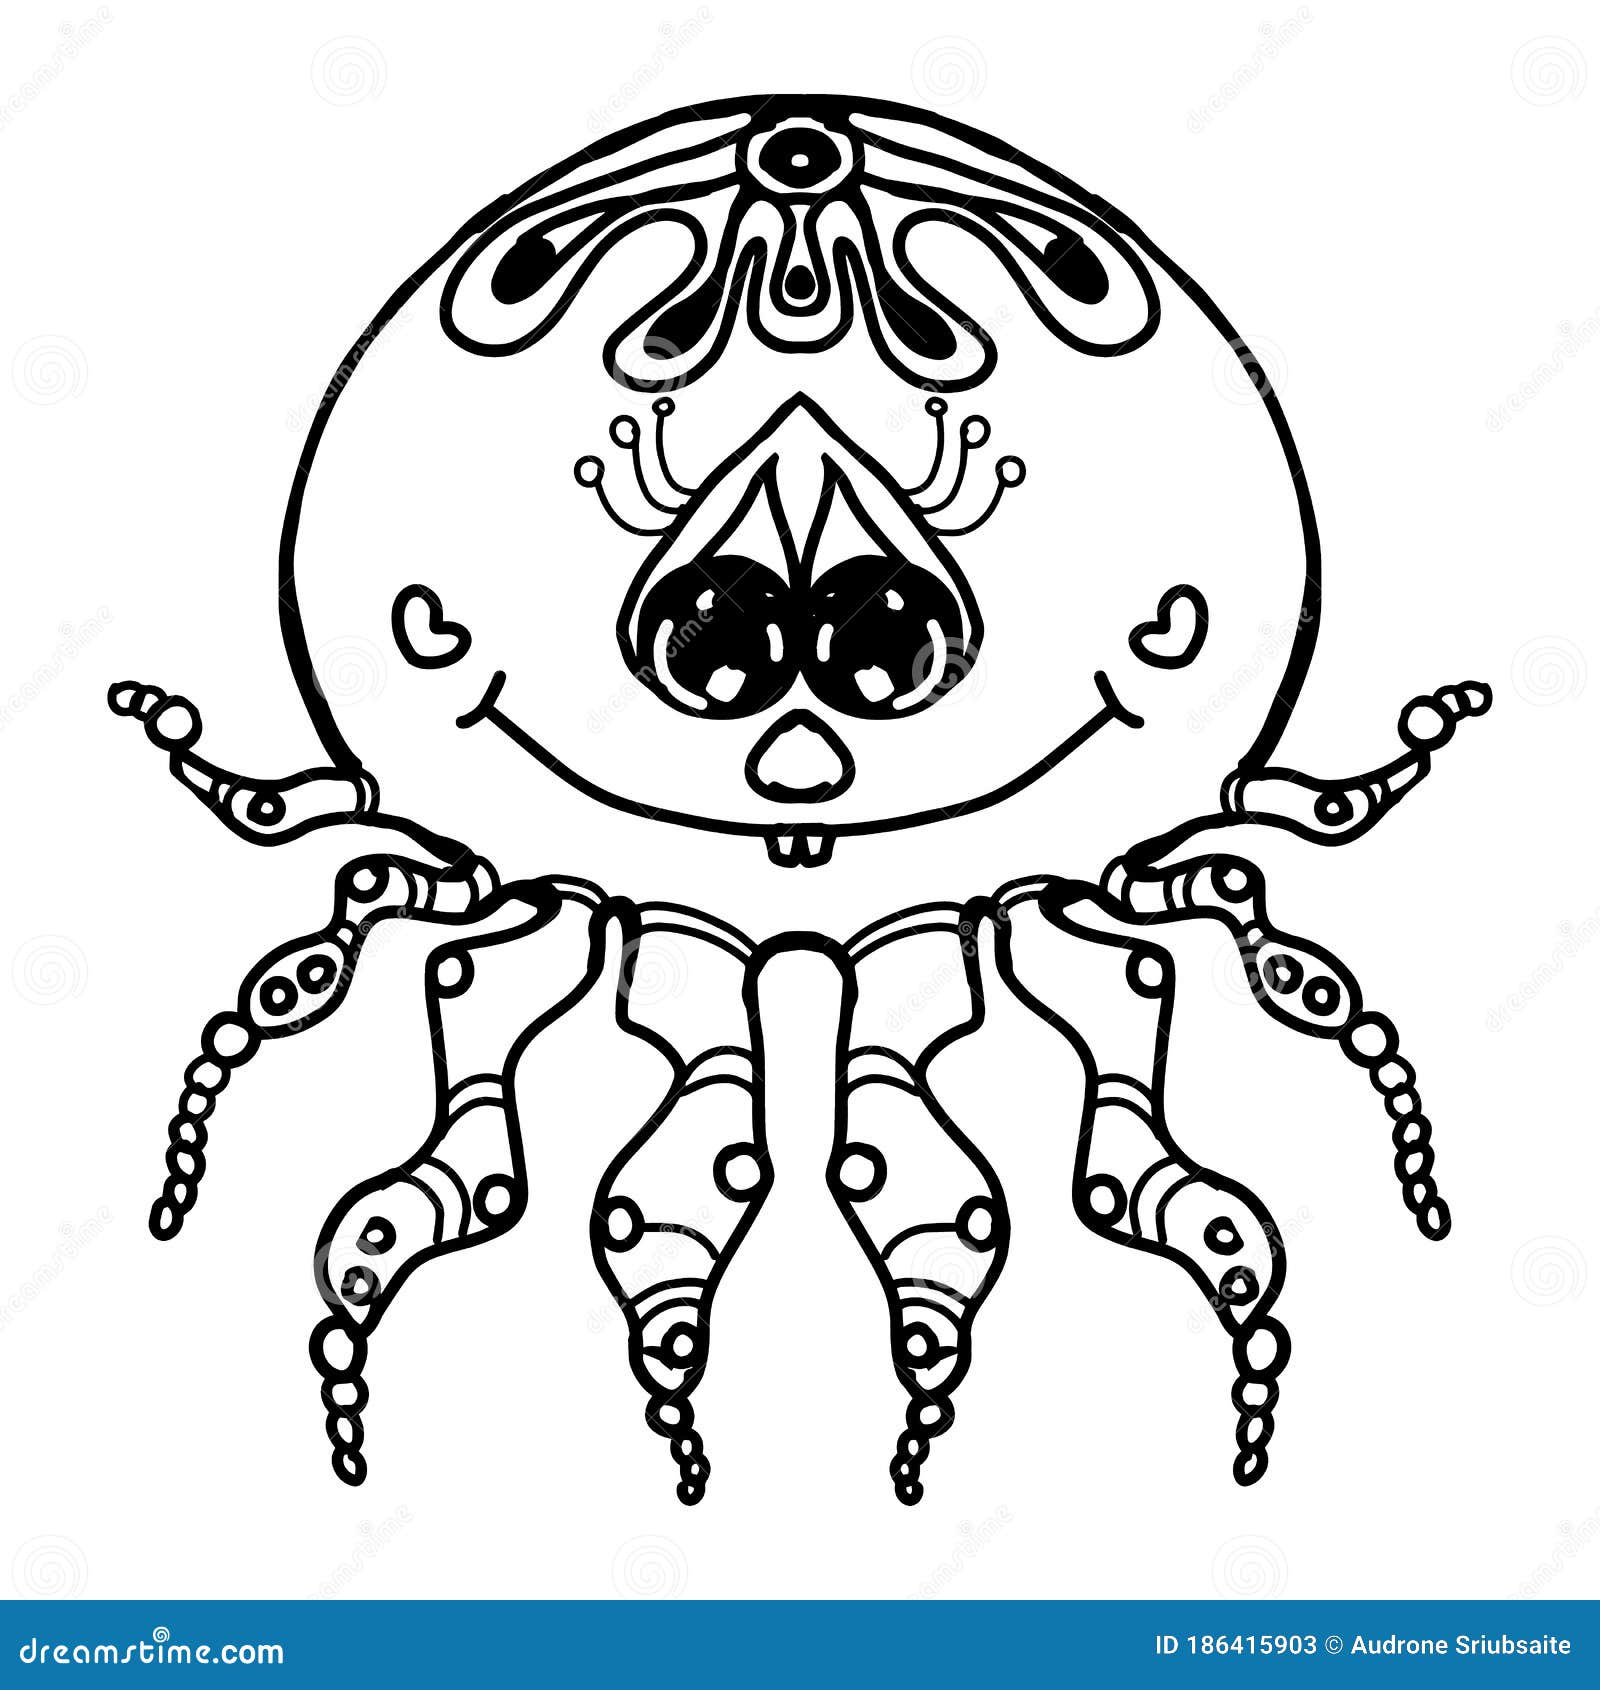 Cartoon Characters a Little Cute Young Spider with Eyes in Love. Black and  White Ink Drawing Stock Vector - Illustration of decoration, animal:  186415903